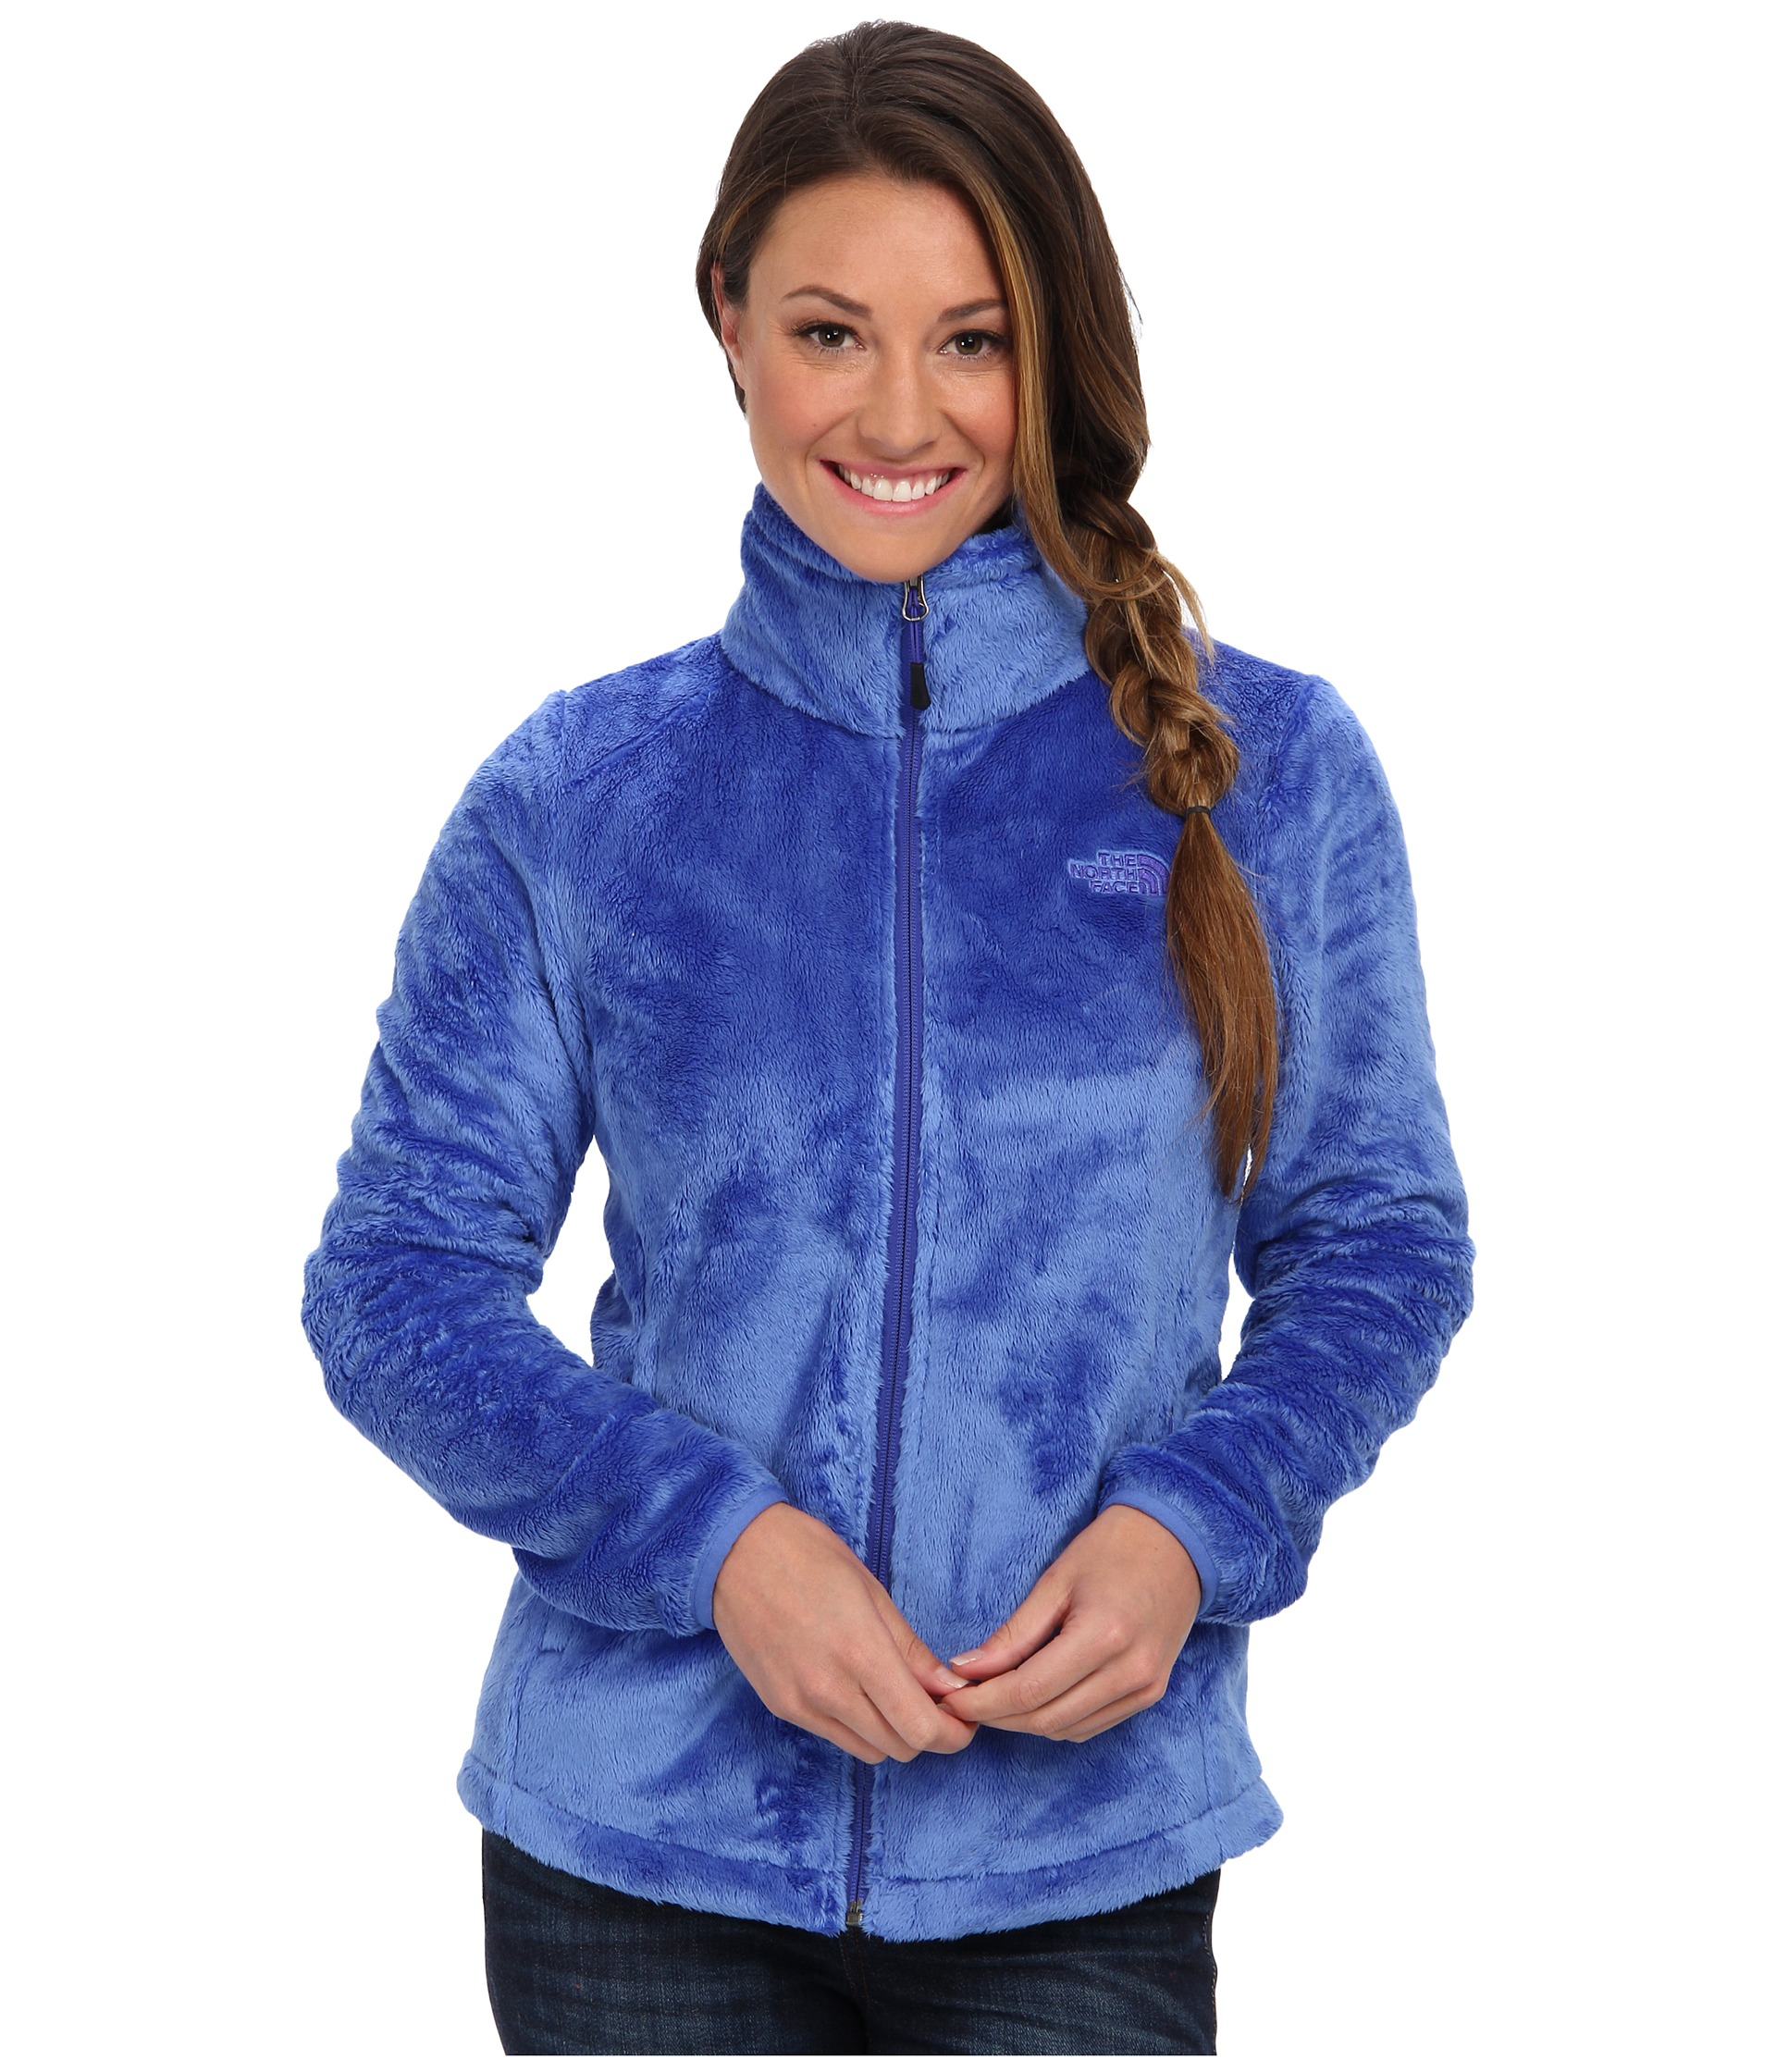 Lyst - The North Face Osito 2 Jacket in Blue